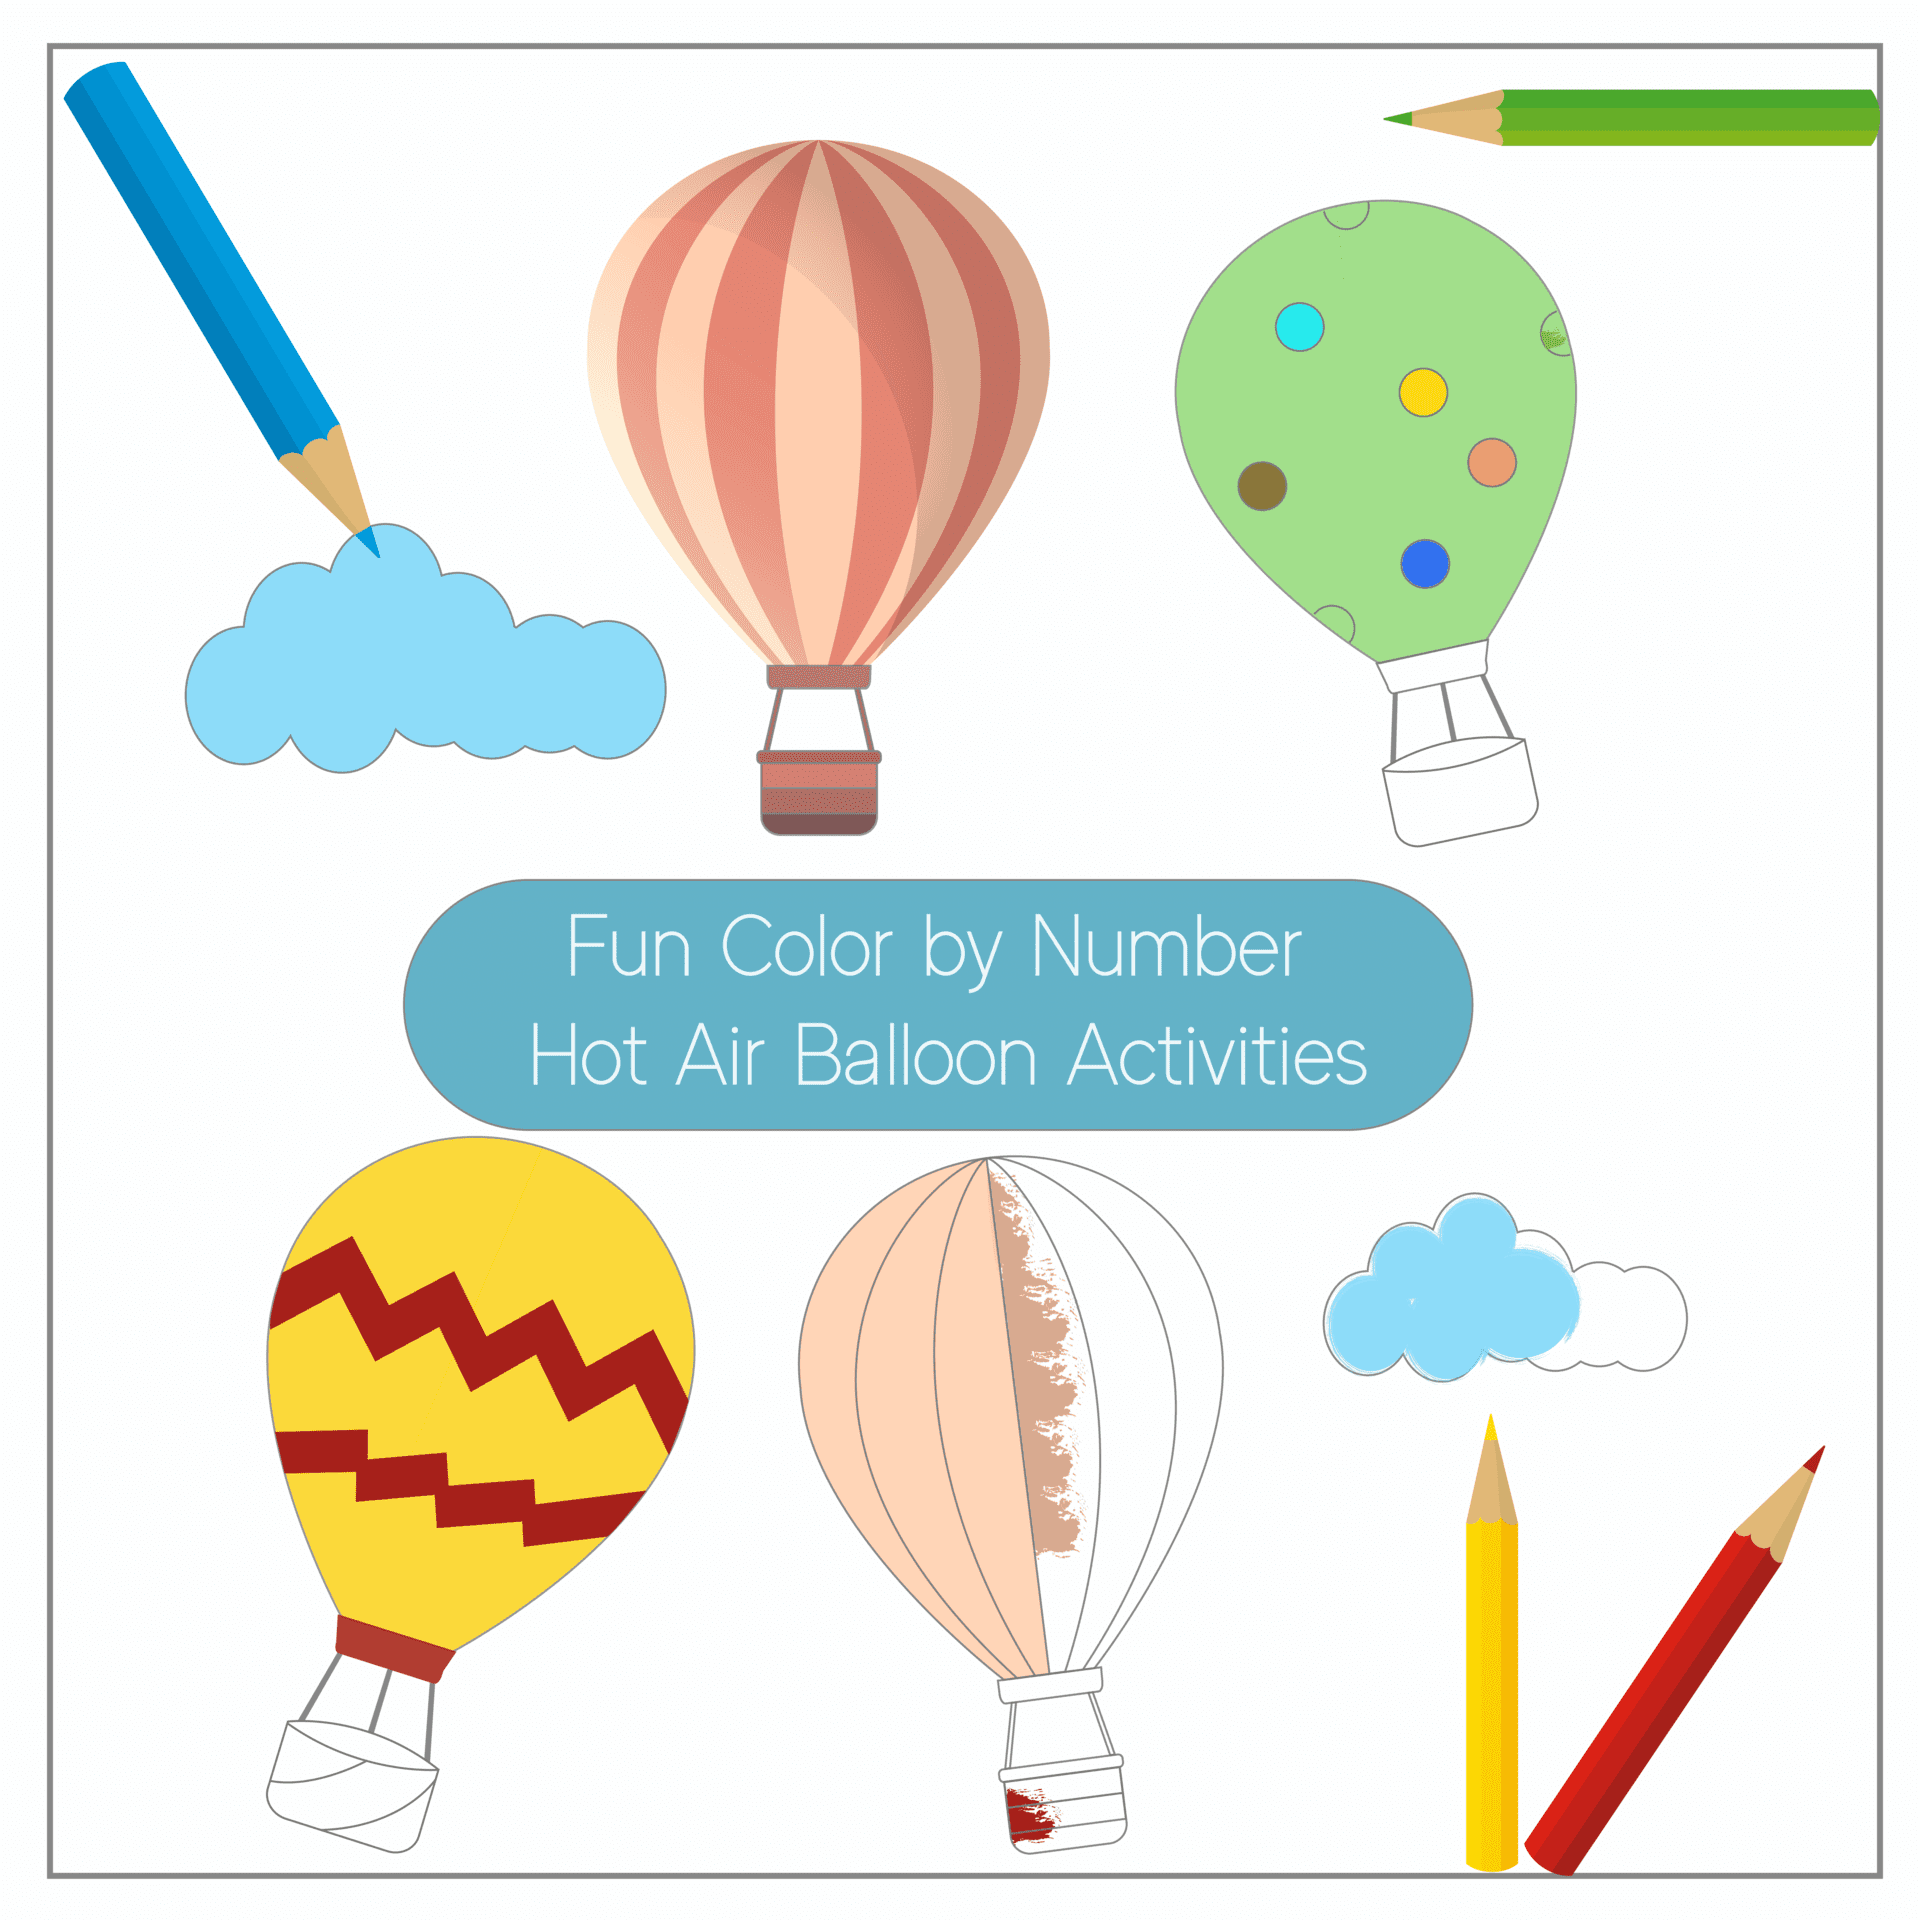 Fun Color by Number Hot Air Balloon Activities | Free Printable